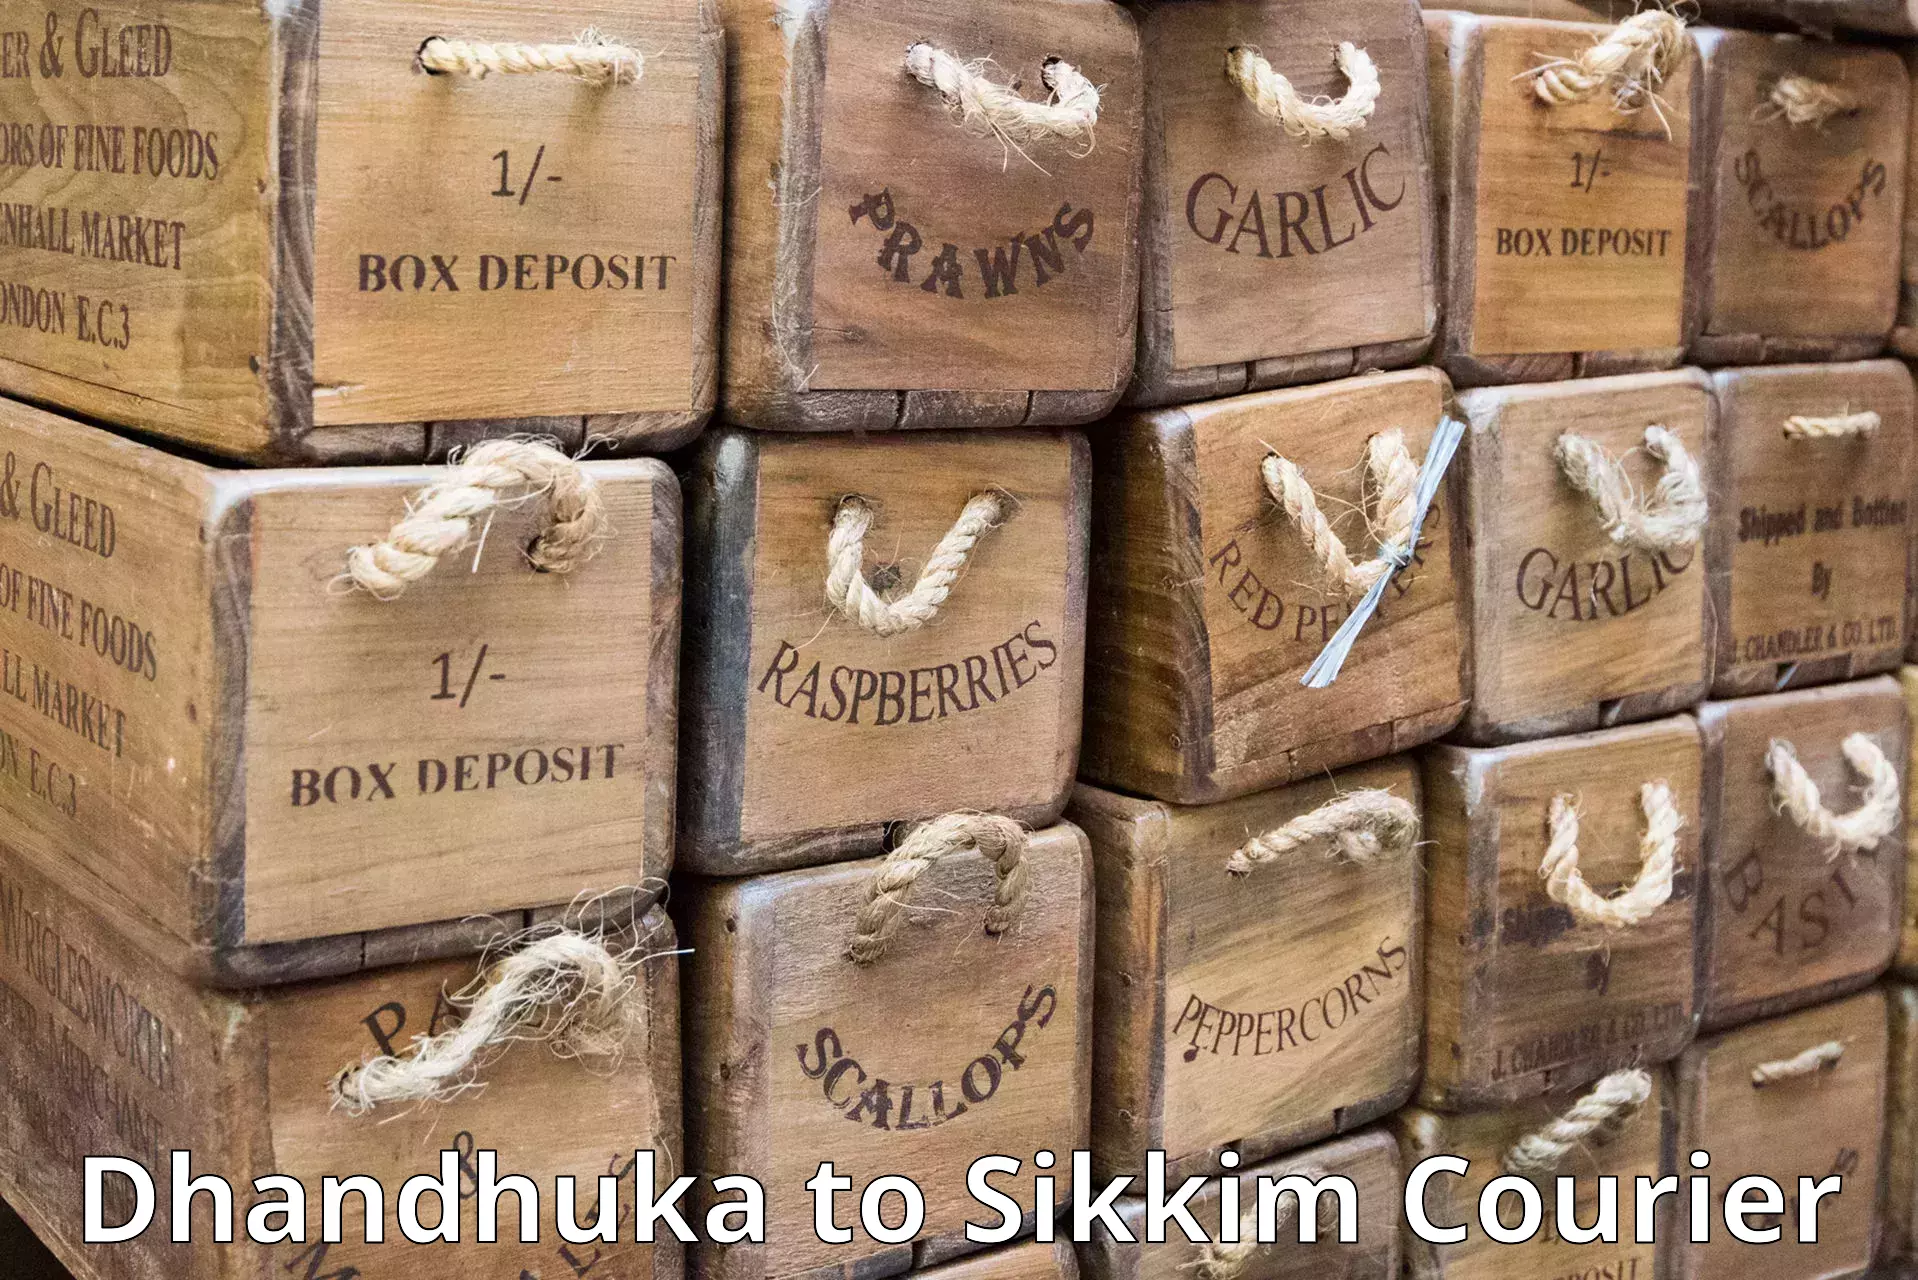 Express delivery capabilities Dhandhuka to Sikkim